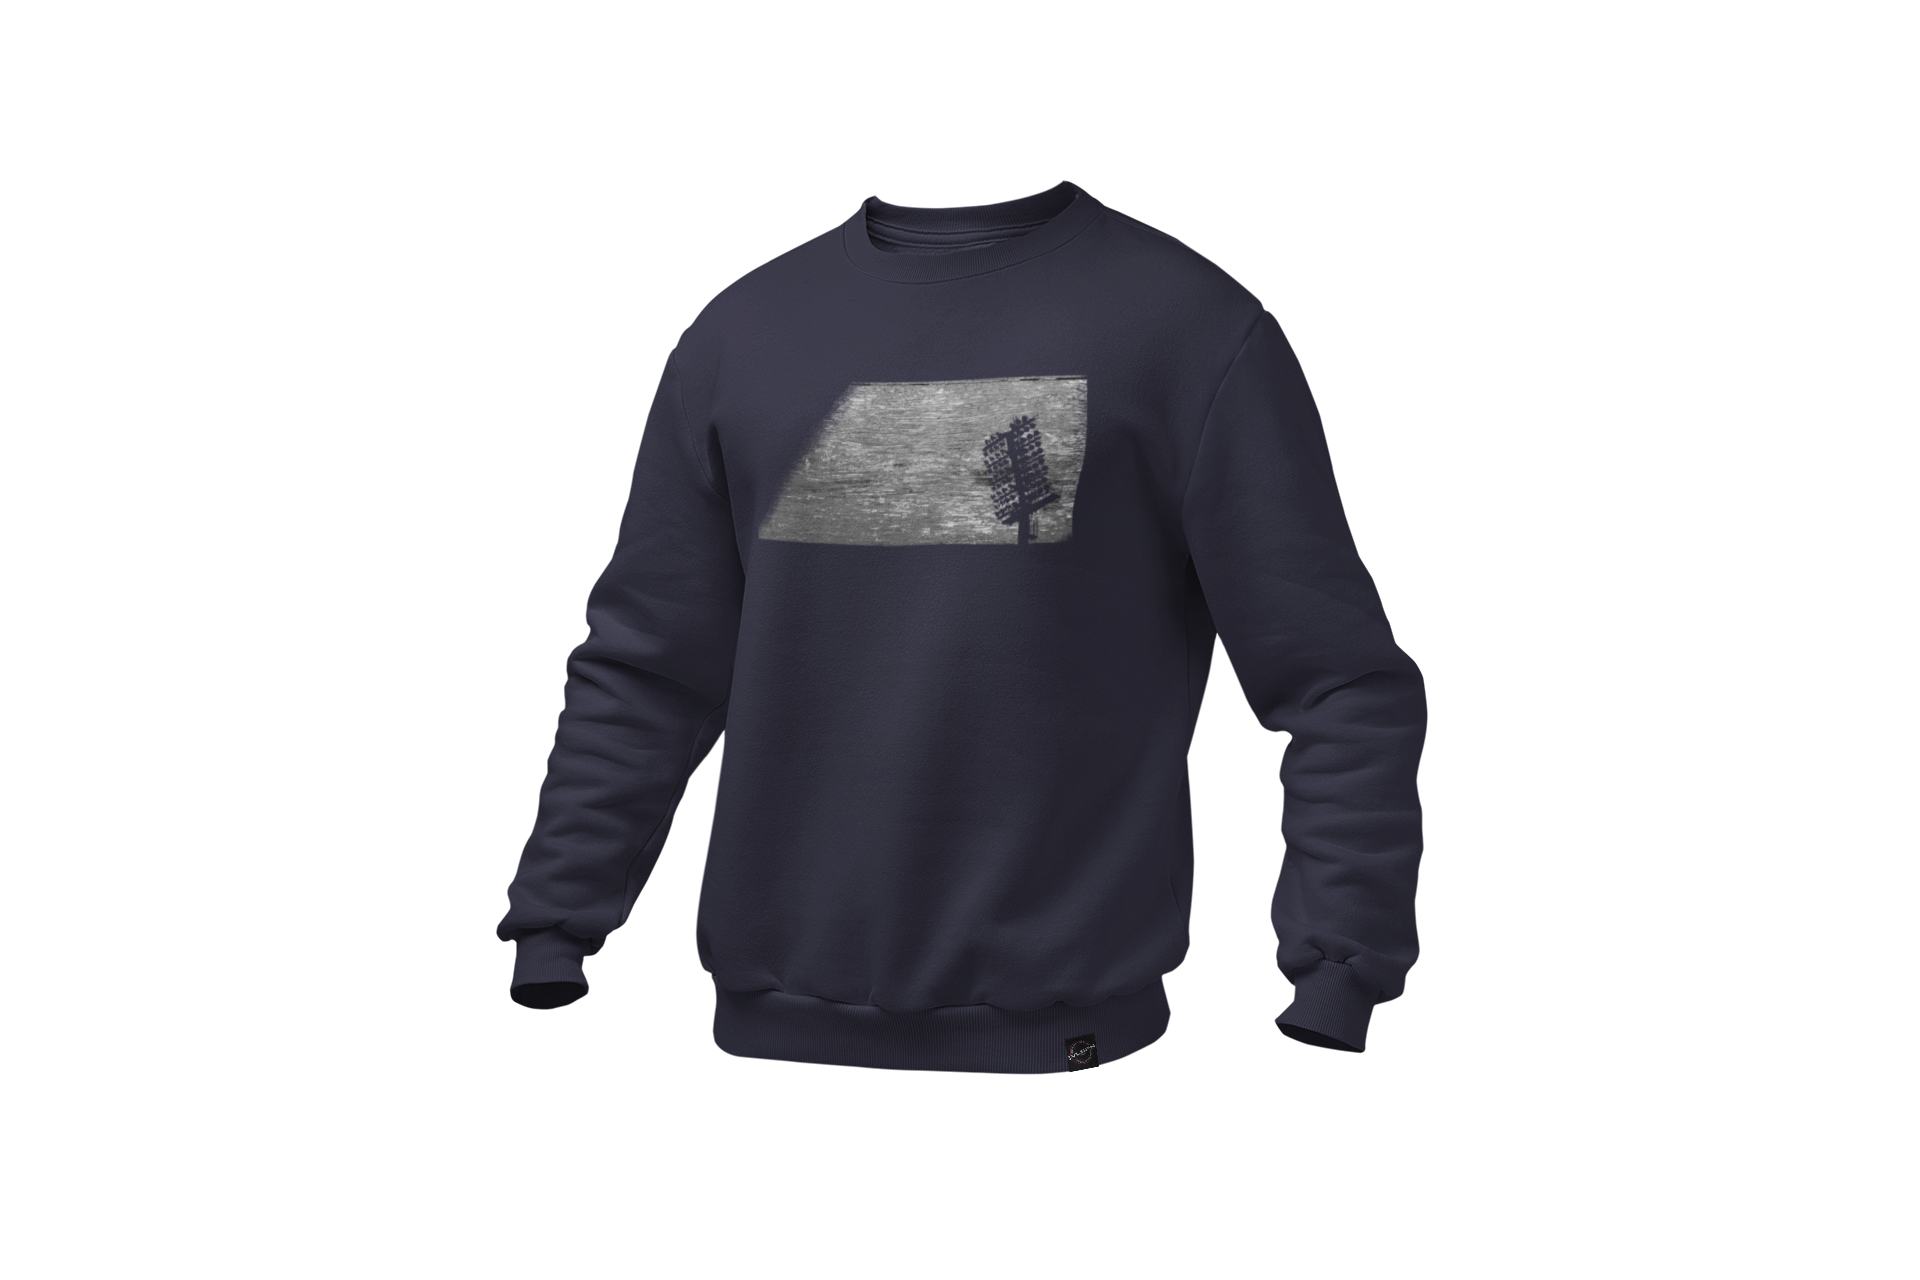 mockup-of-a-ghosted-crewneck-sweatshirt-over-a-solid-background-26960 (21).png